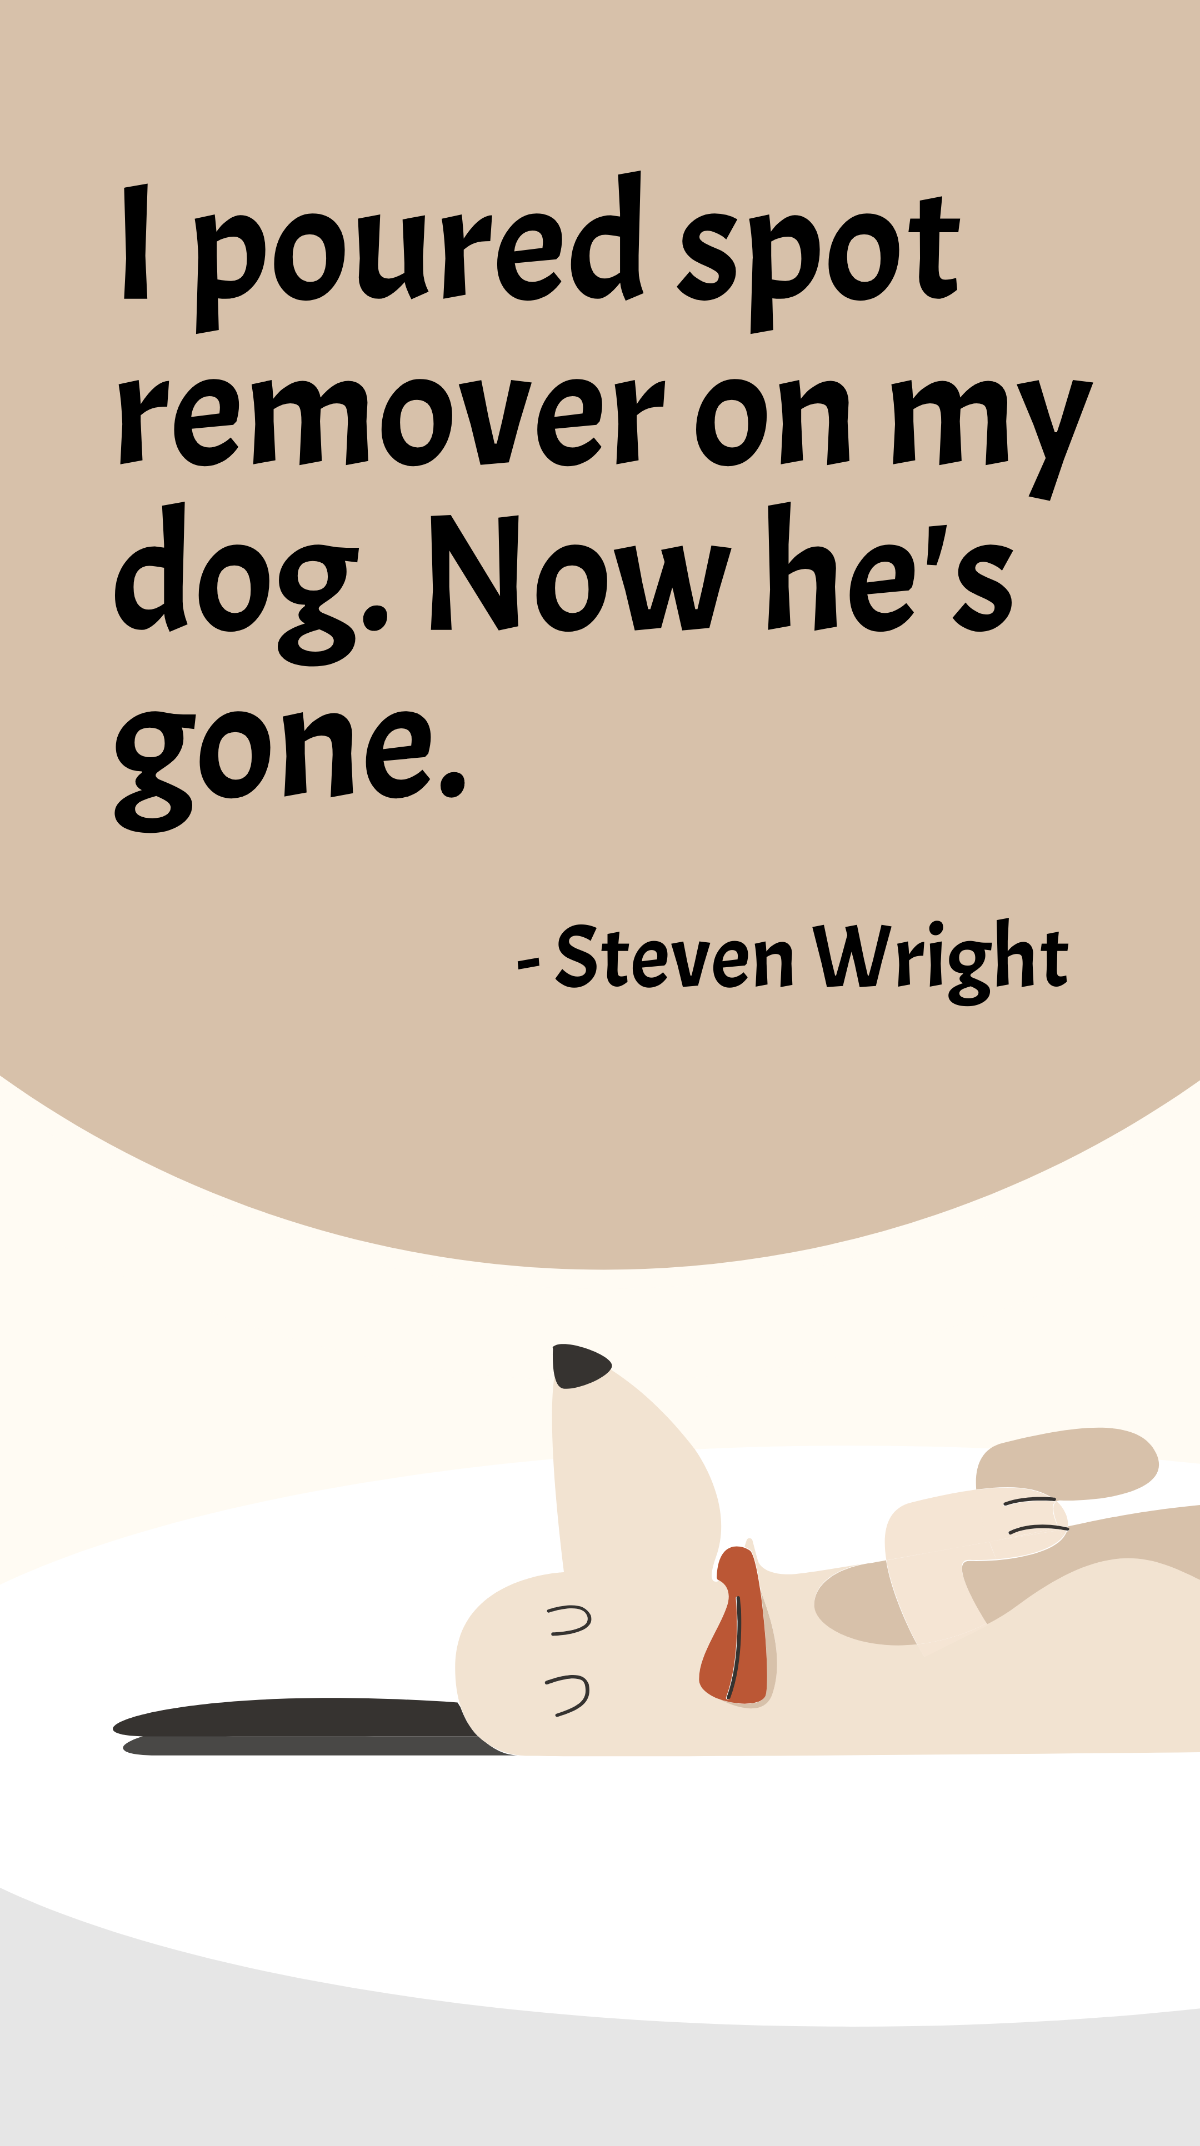 Steven Wright - I poured spot remover on my dog. Now he's gone. Template